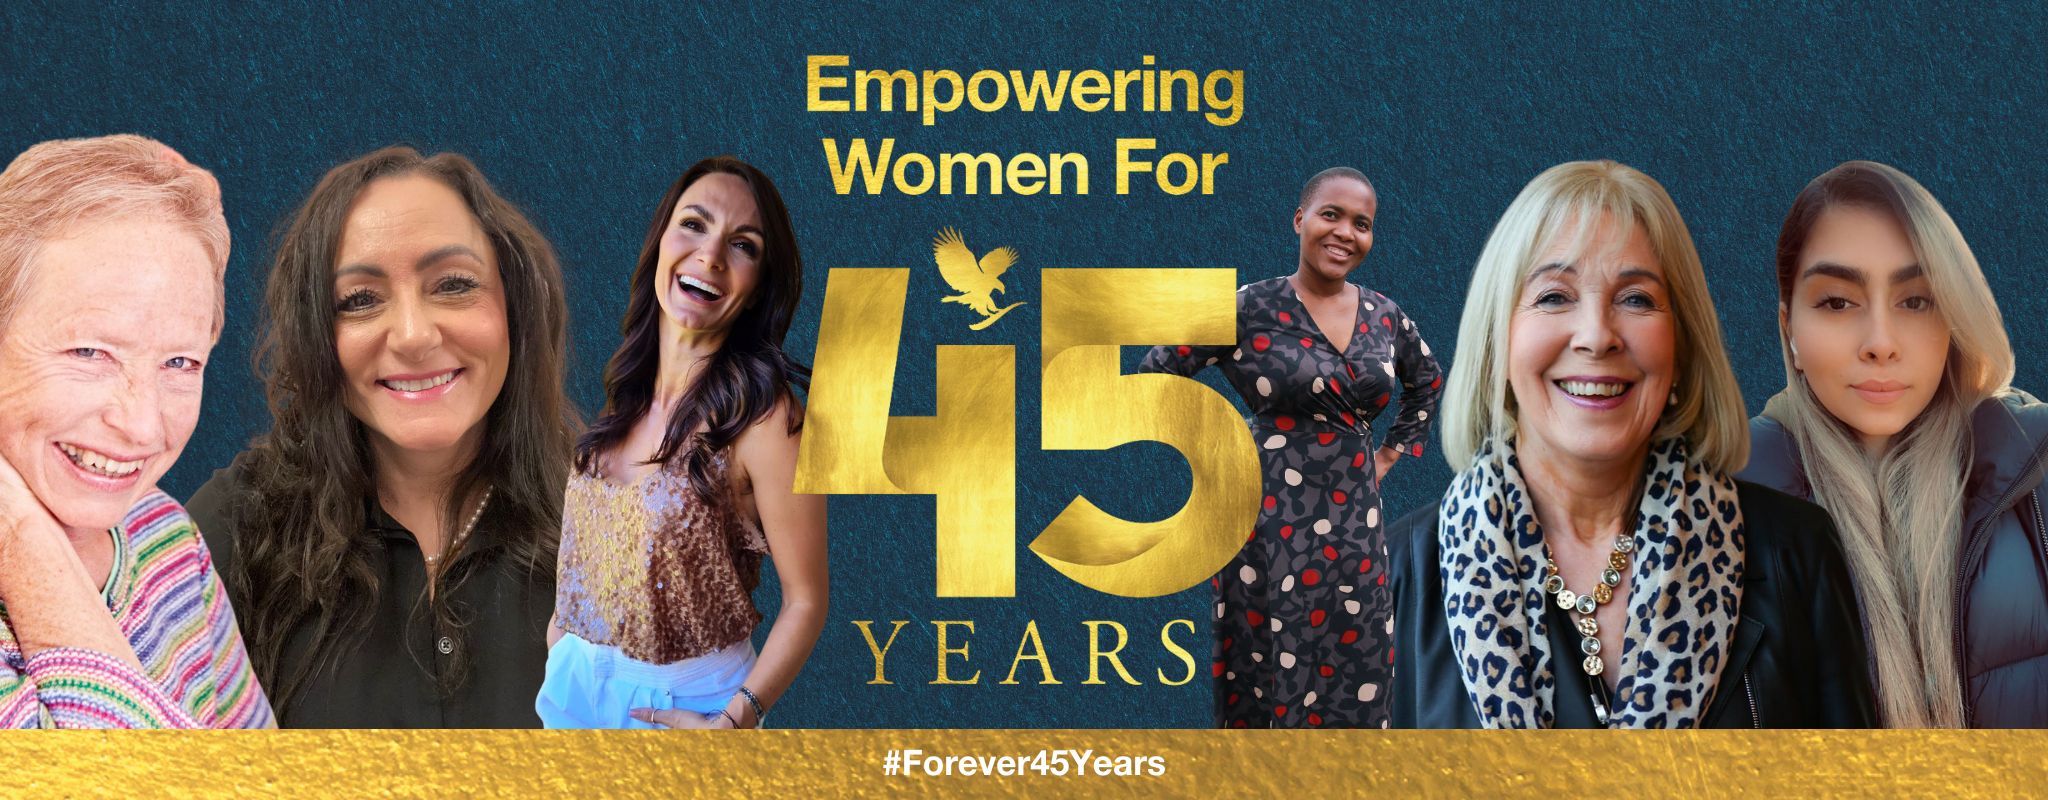 Empowering Women for 45 Years